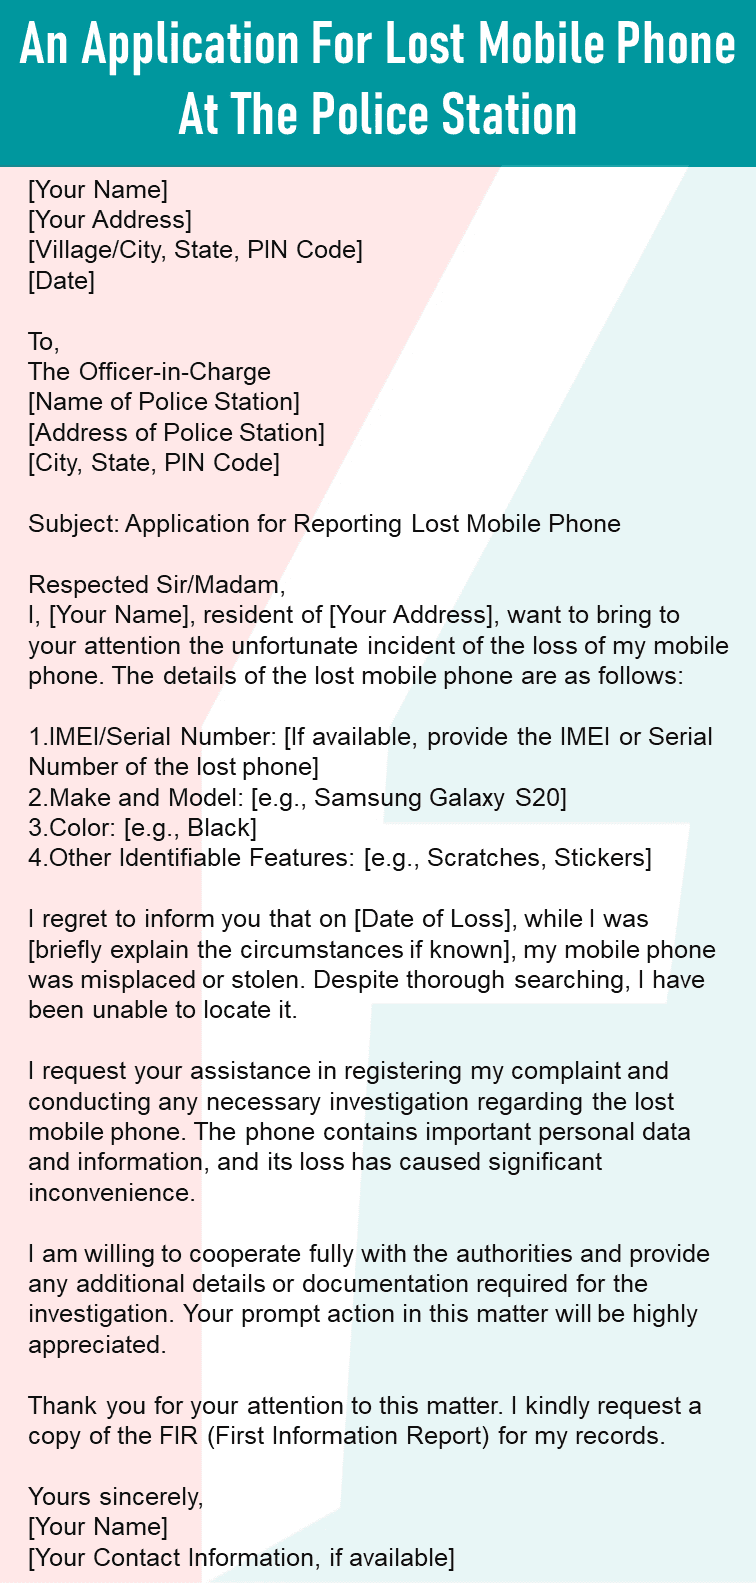 How to Write an Application for Lost Mobile Phone at the Police Station